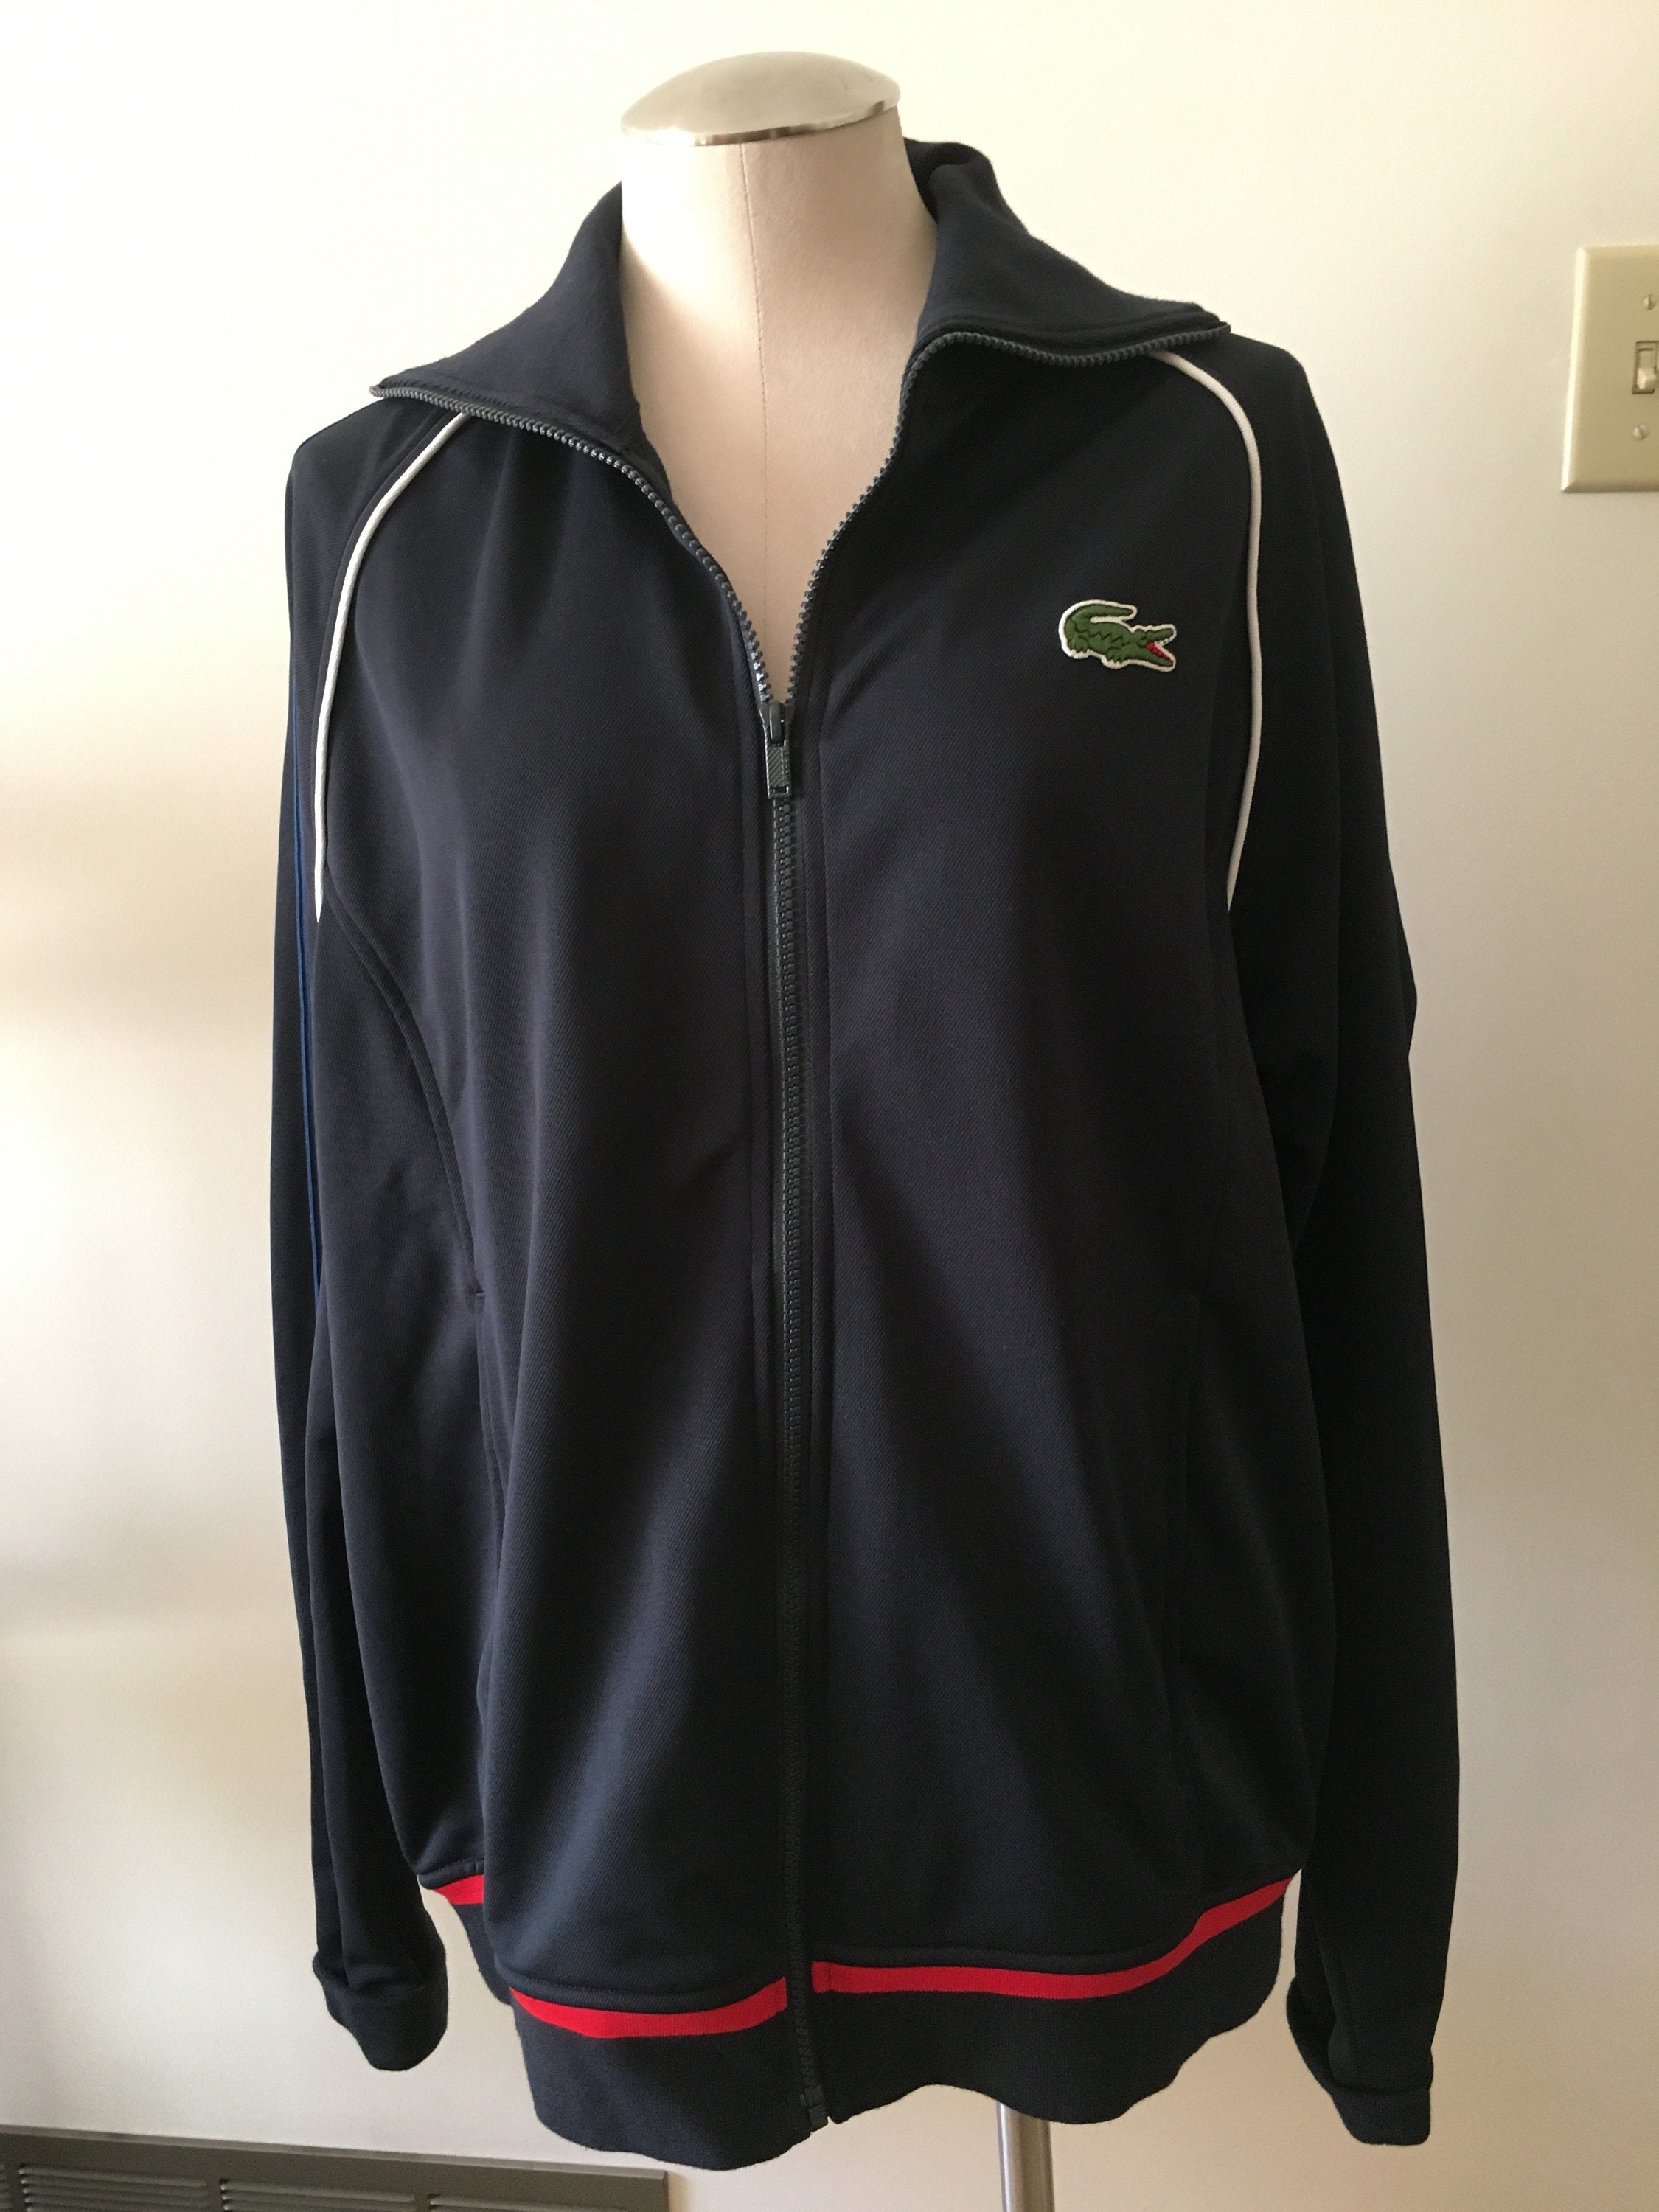 Lacoste Andy Roddick Mens Tennis Track Size 6